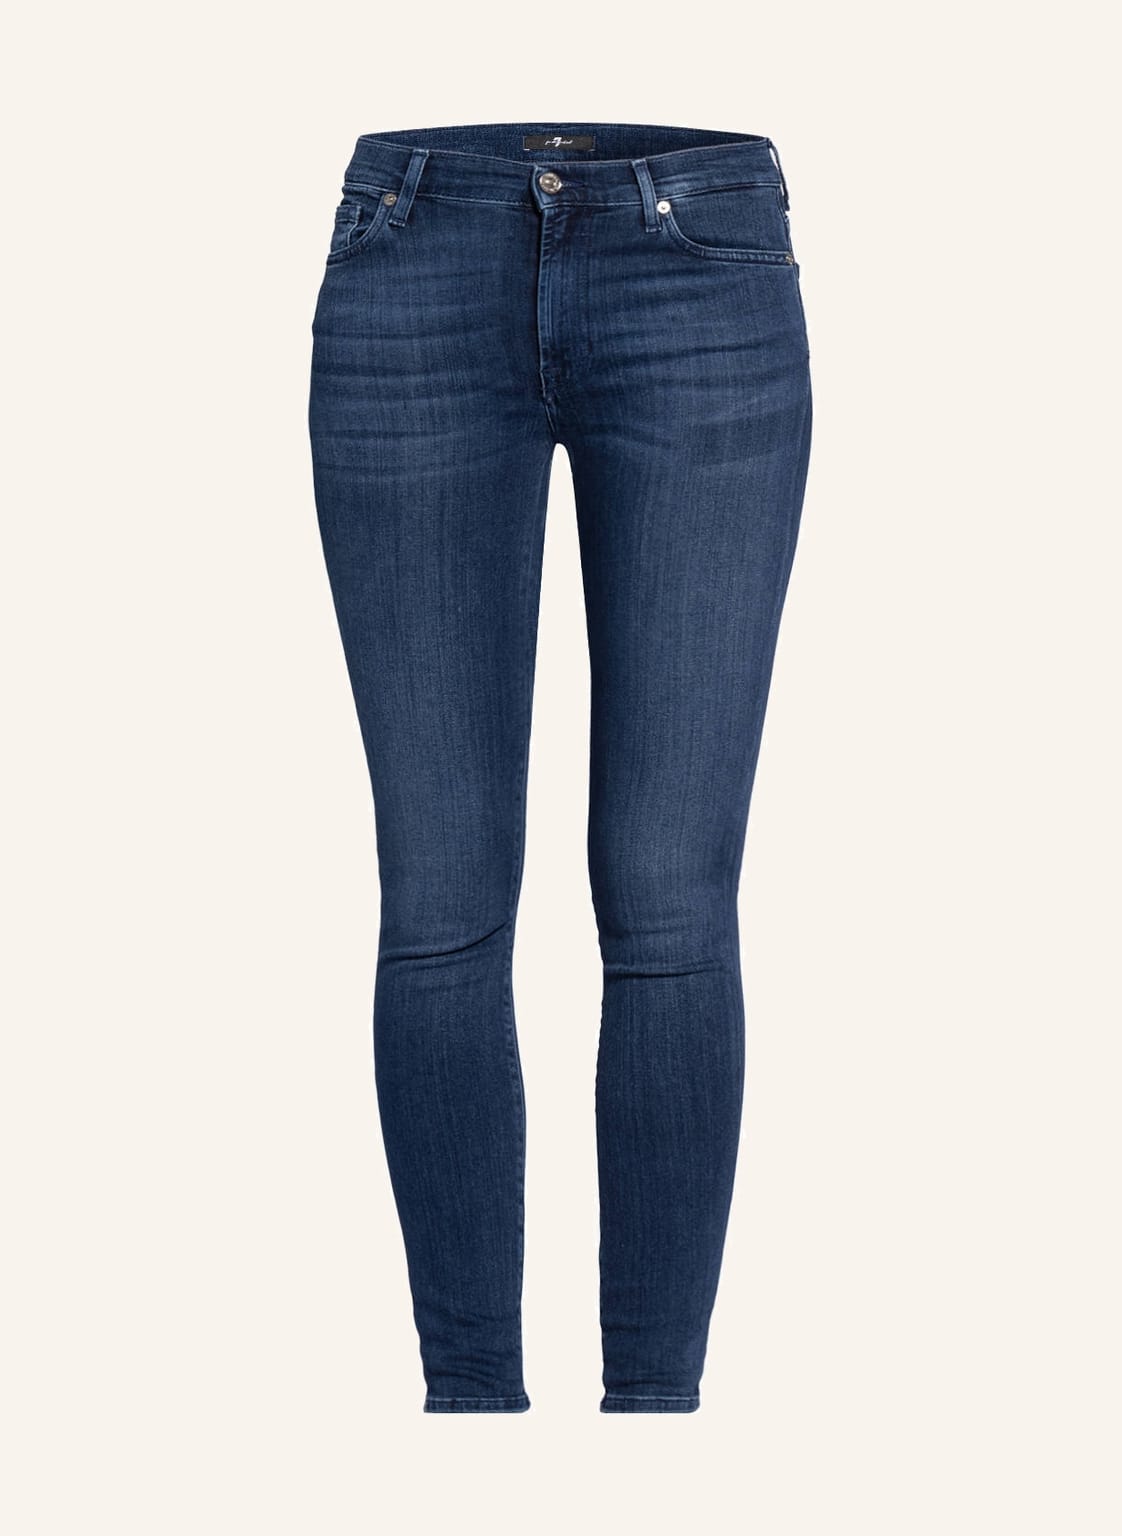 7 For All Mankind Skinny Jeans blau von 7 For All Mankind